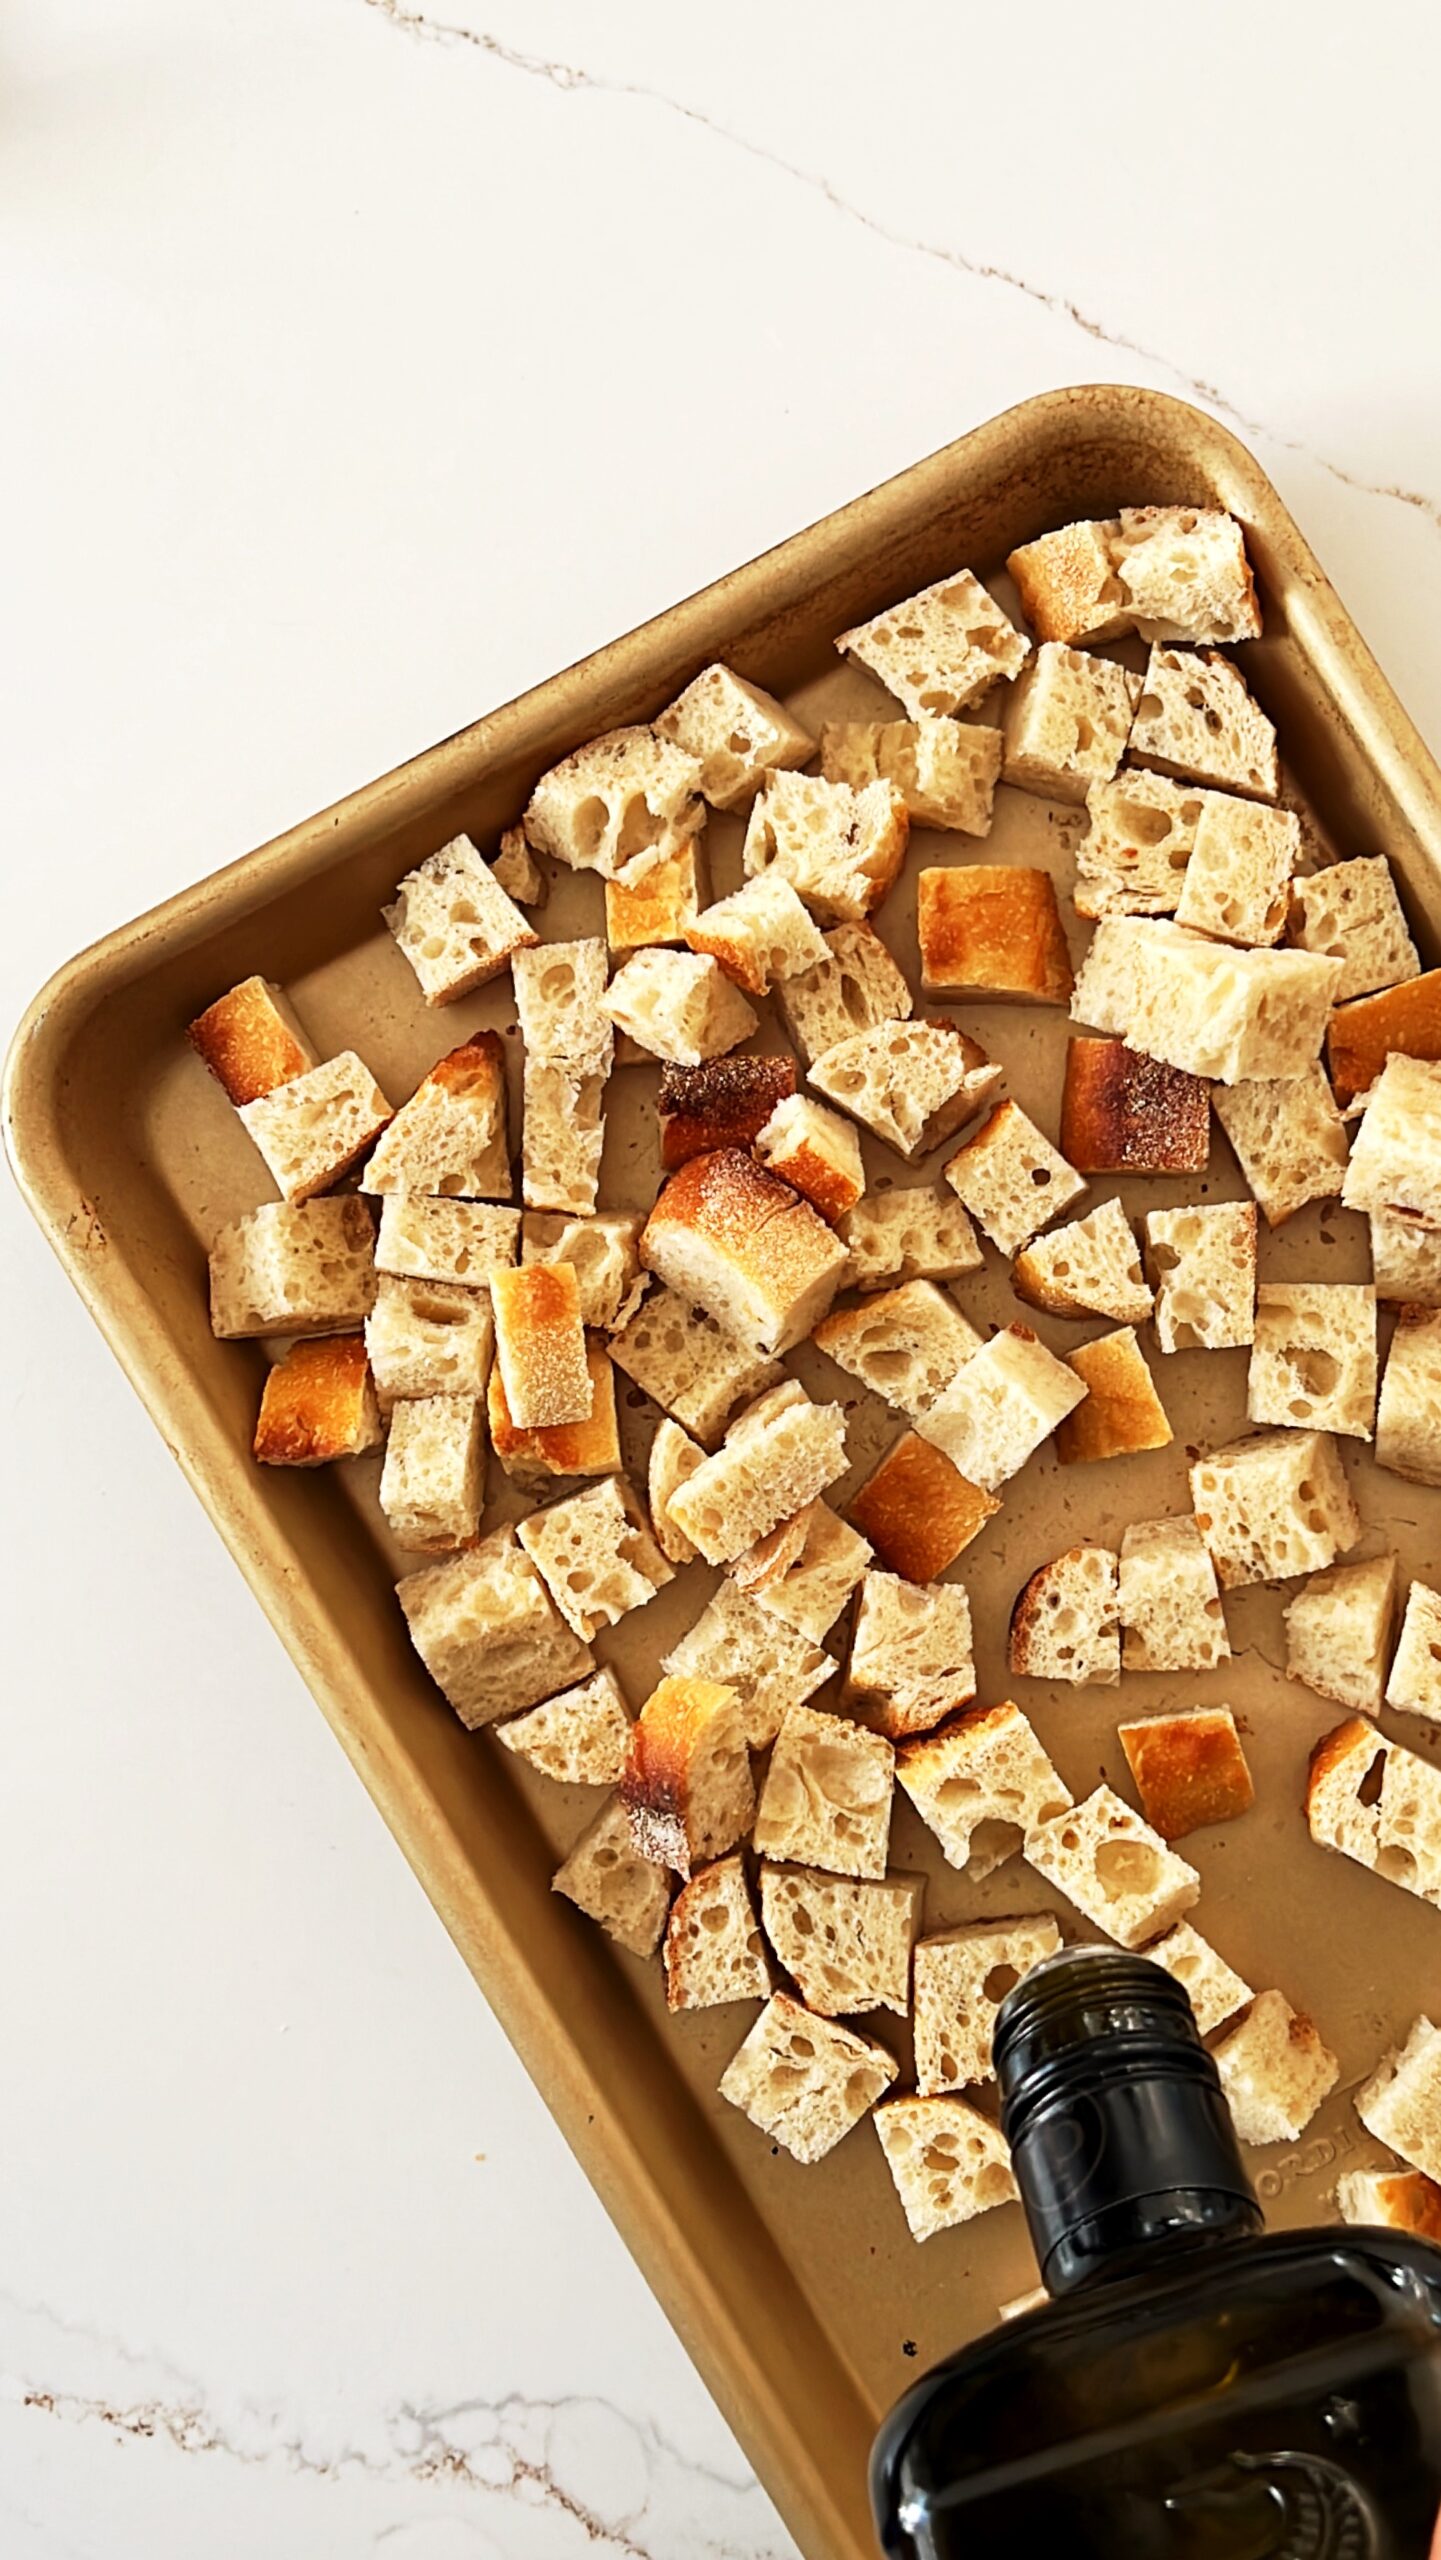 Baking sheet with cubed bread